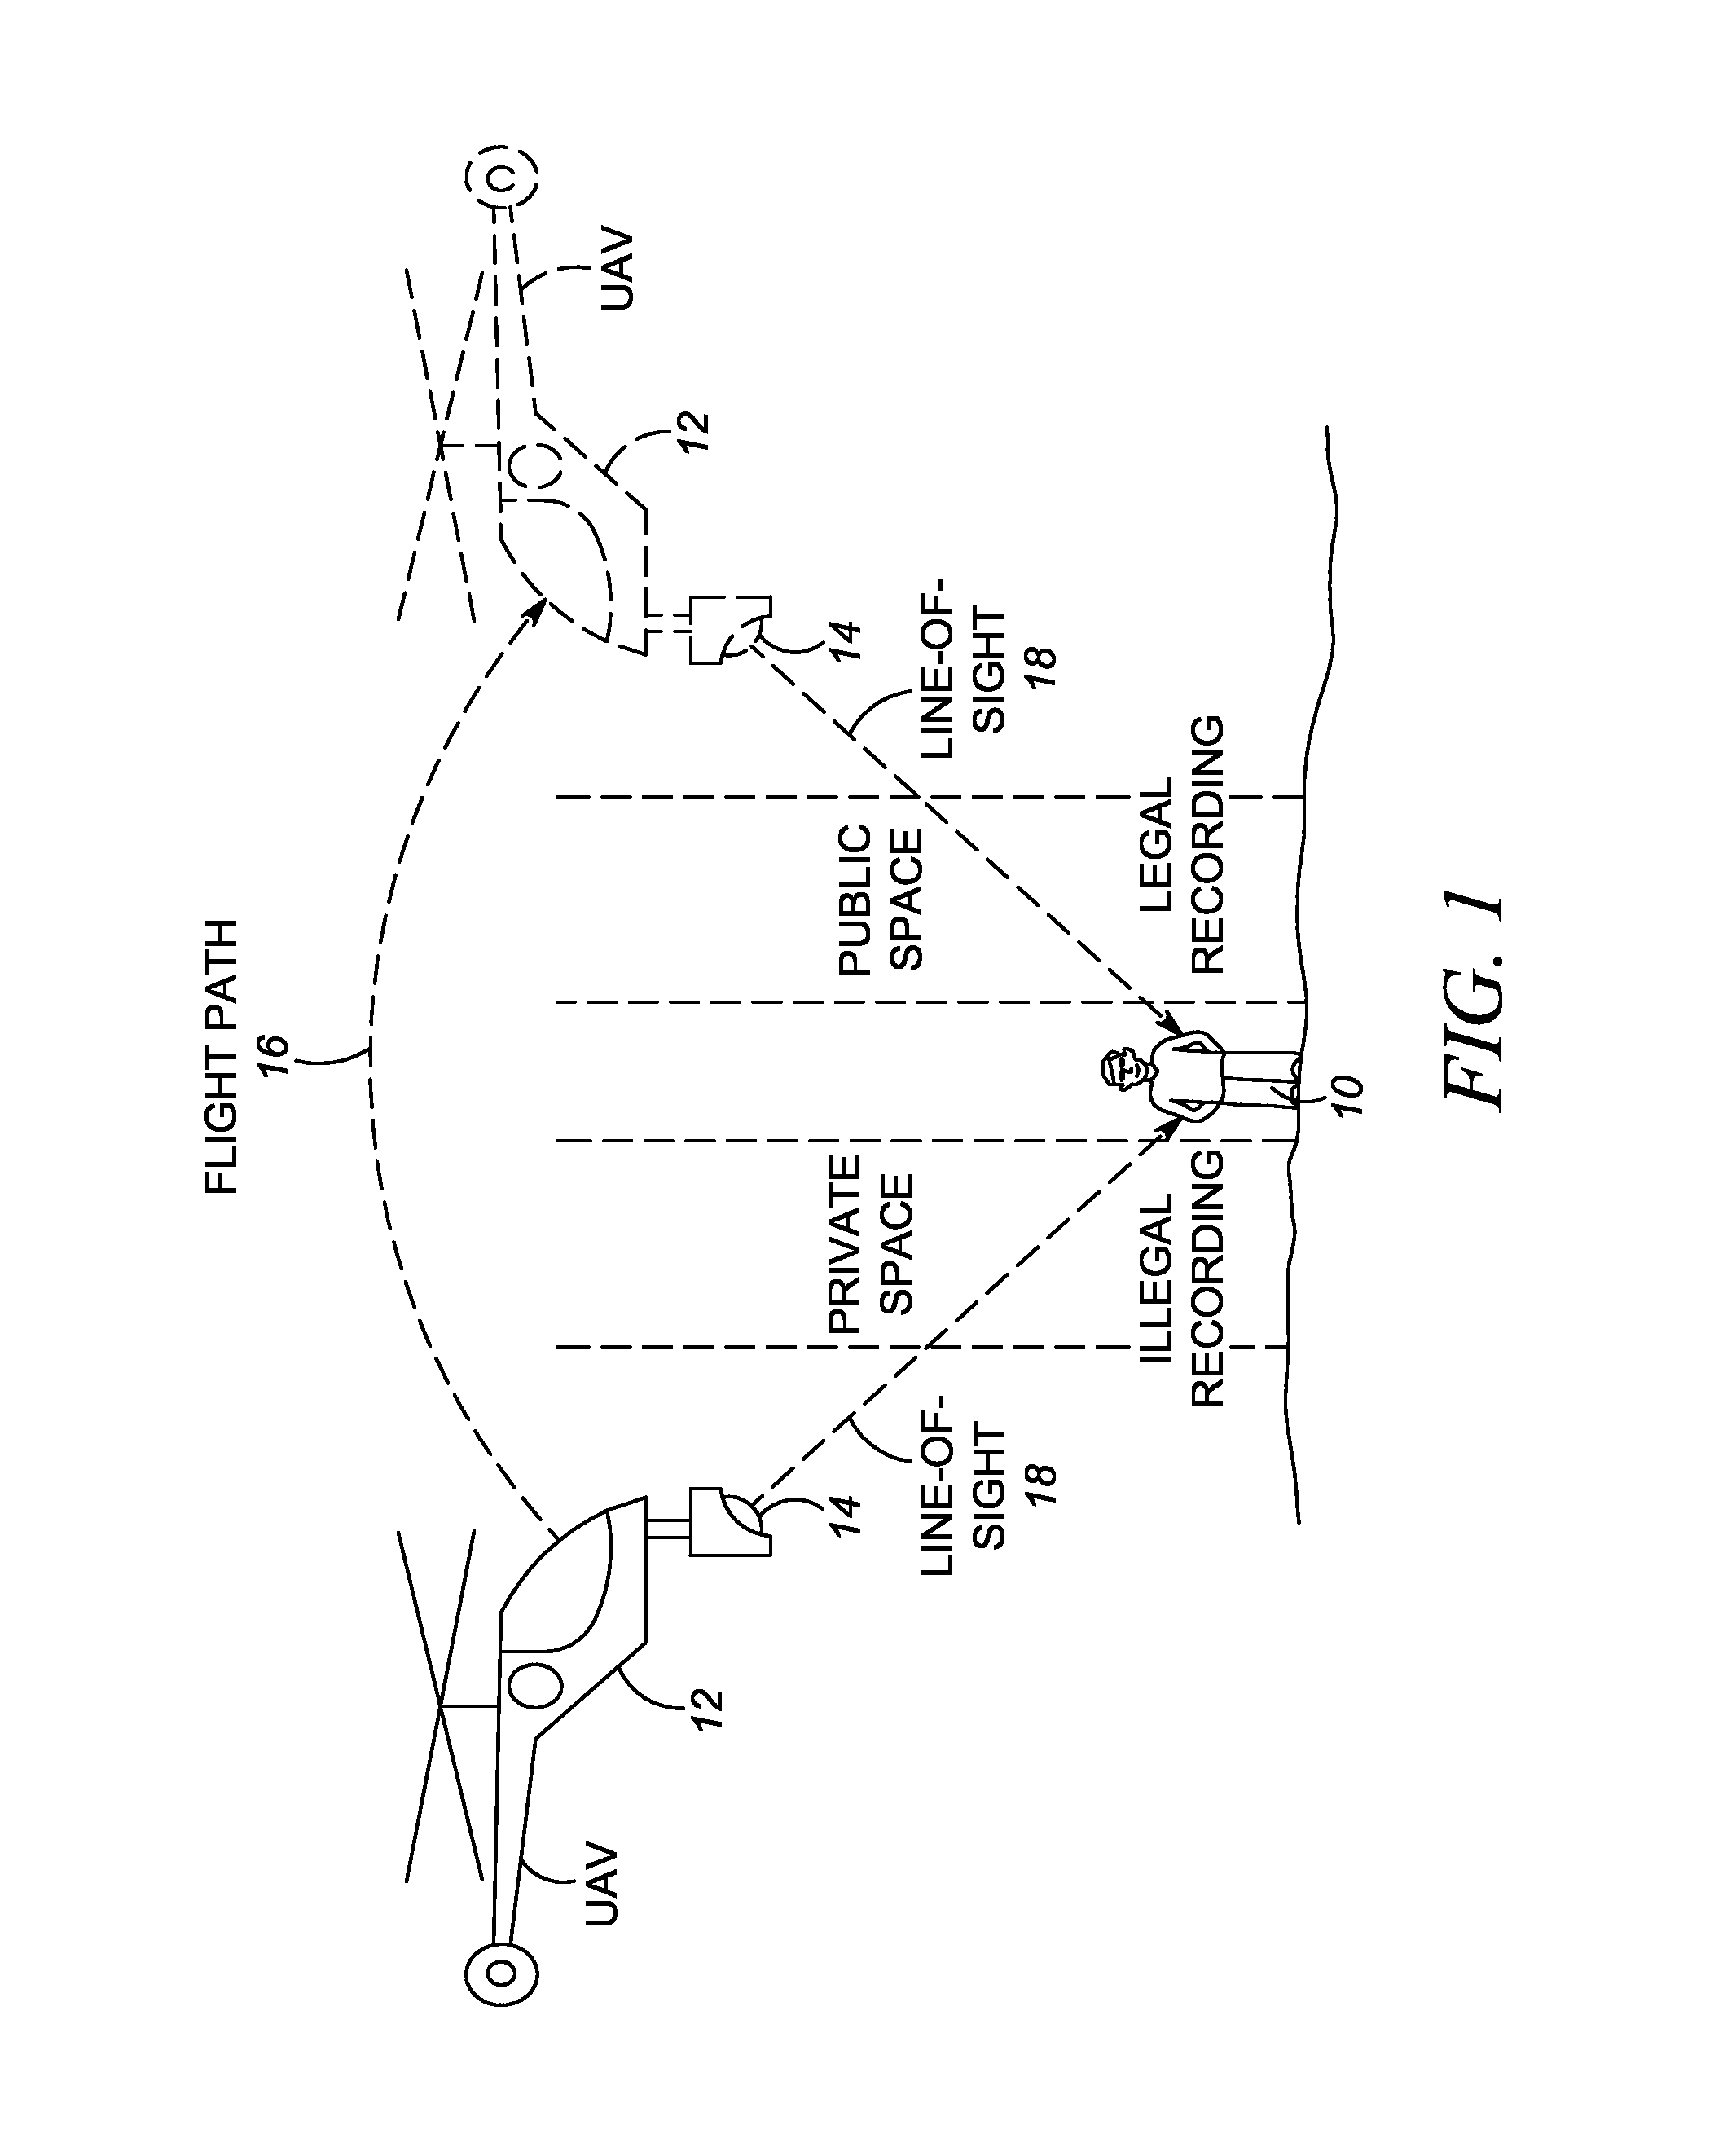 Method of and system for conducting mobile video/audio surveillance in compliance with privacy rights